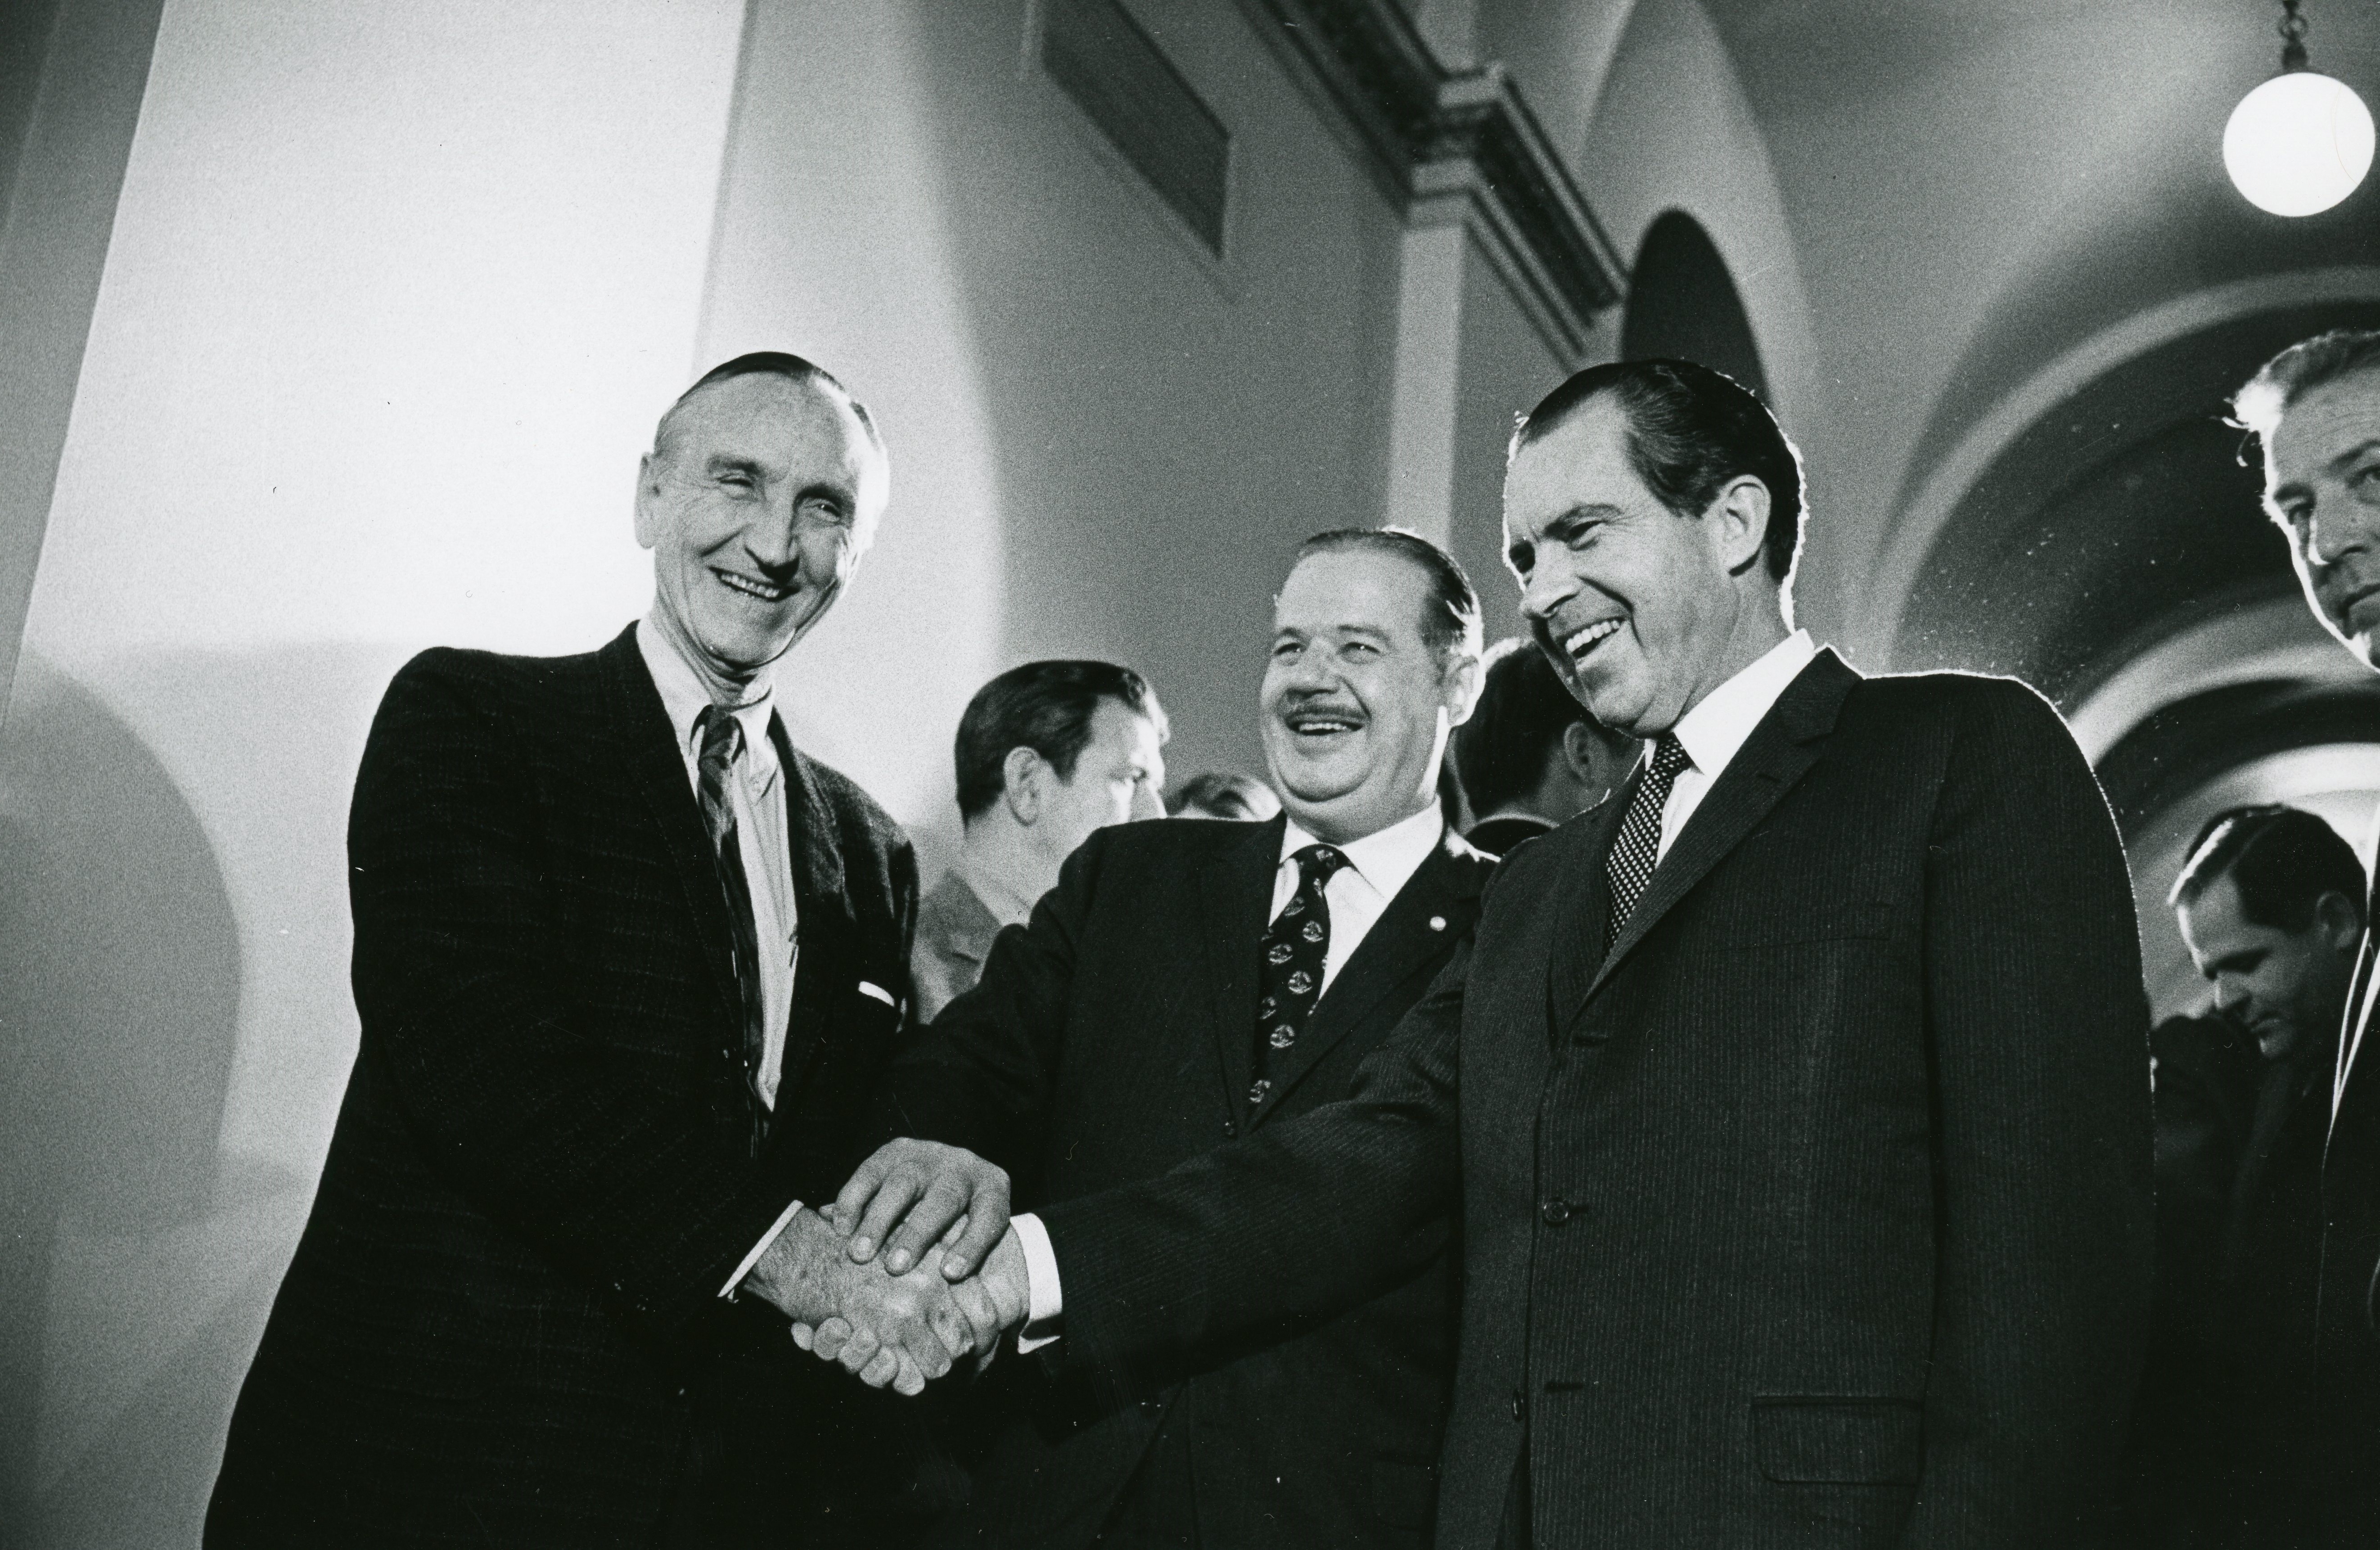 4b. President Nixon with Congressional leaders after attending a luncheon with them 12-23-69 (2693-22) (1)